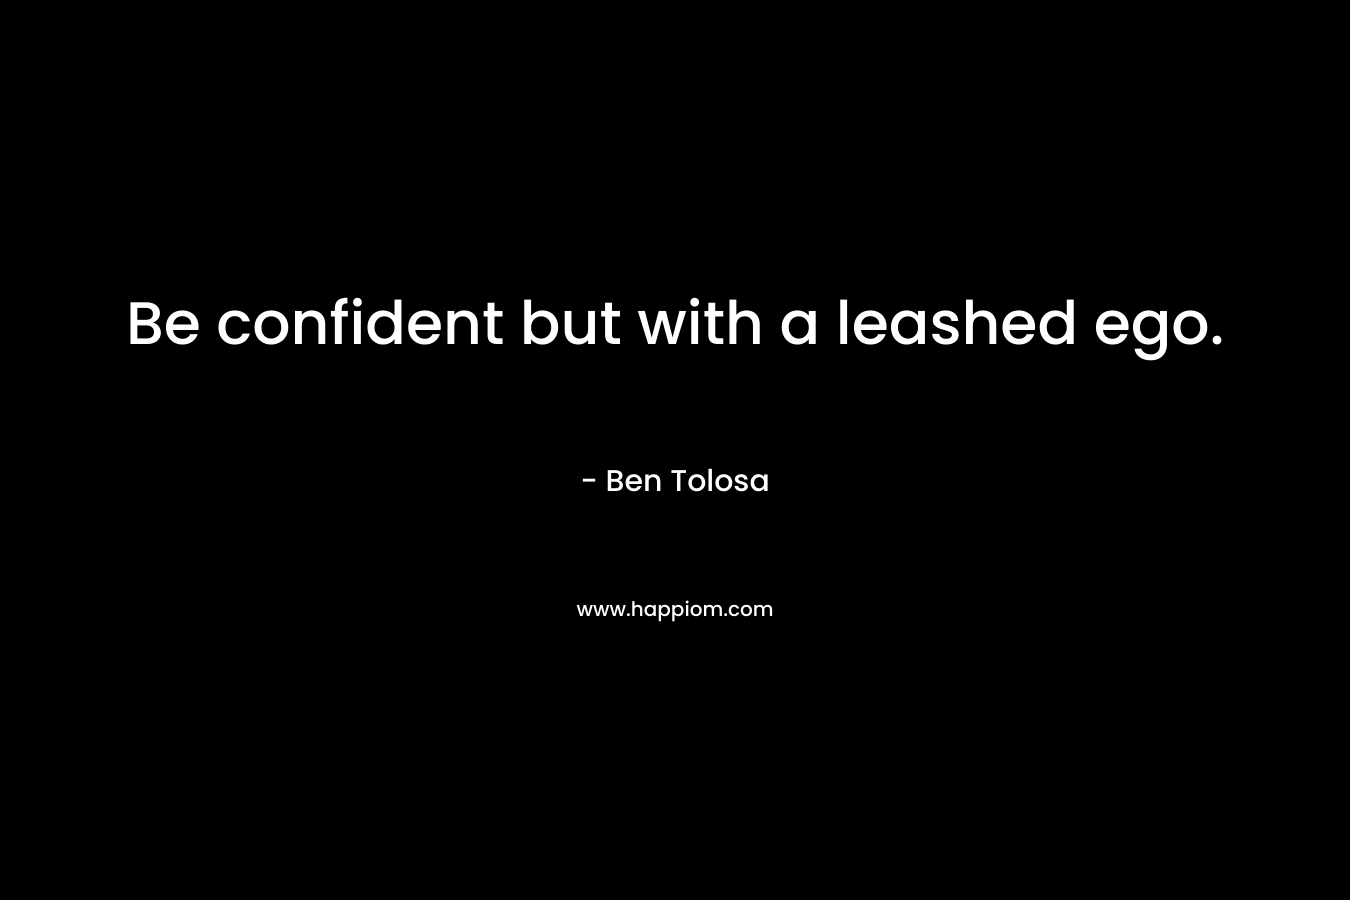 Be confident but with a leashed ego. – Ben Tolosa